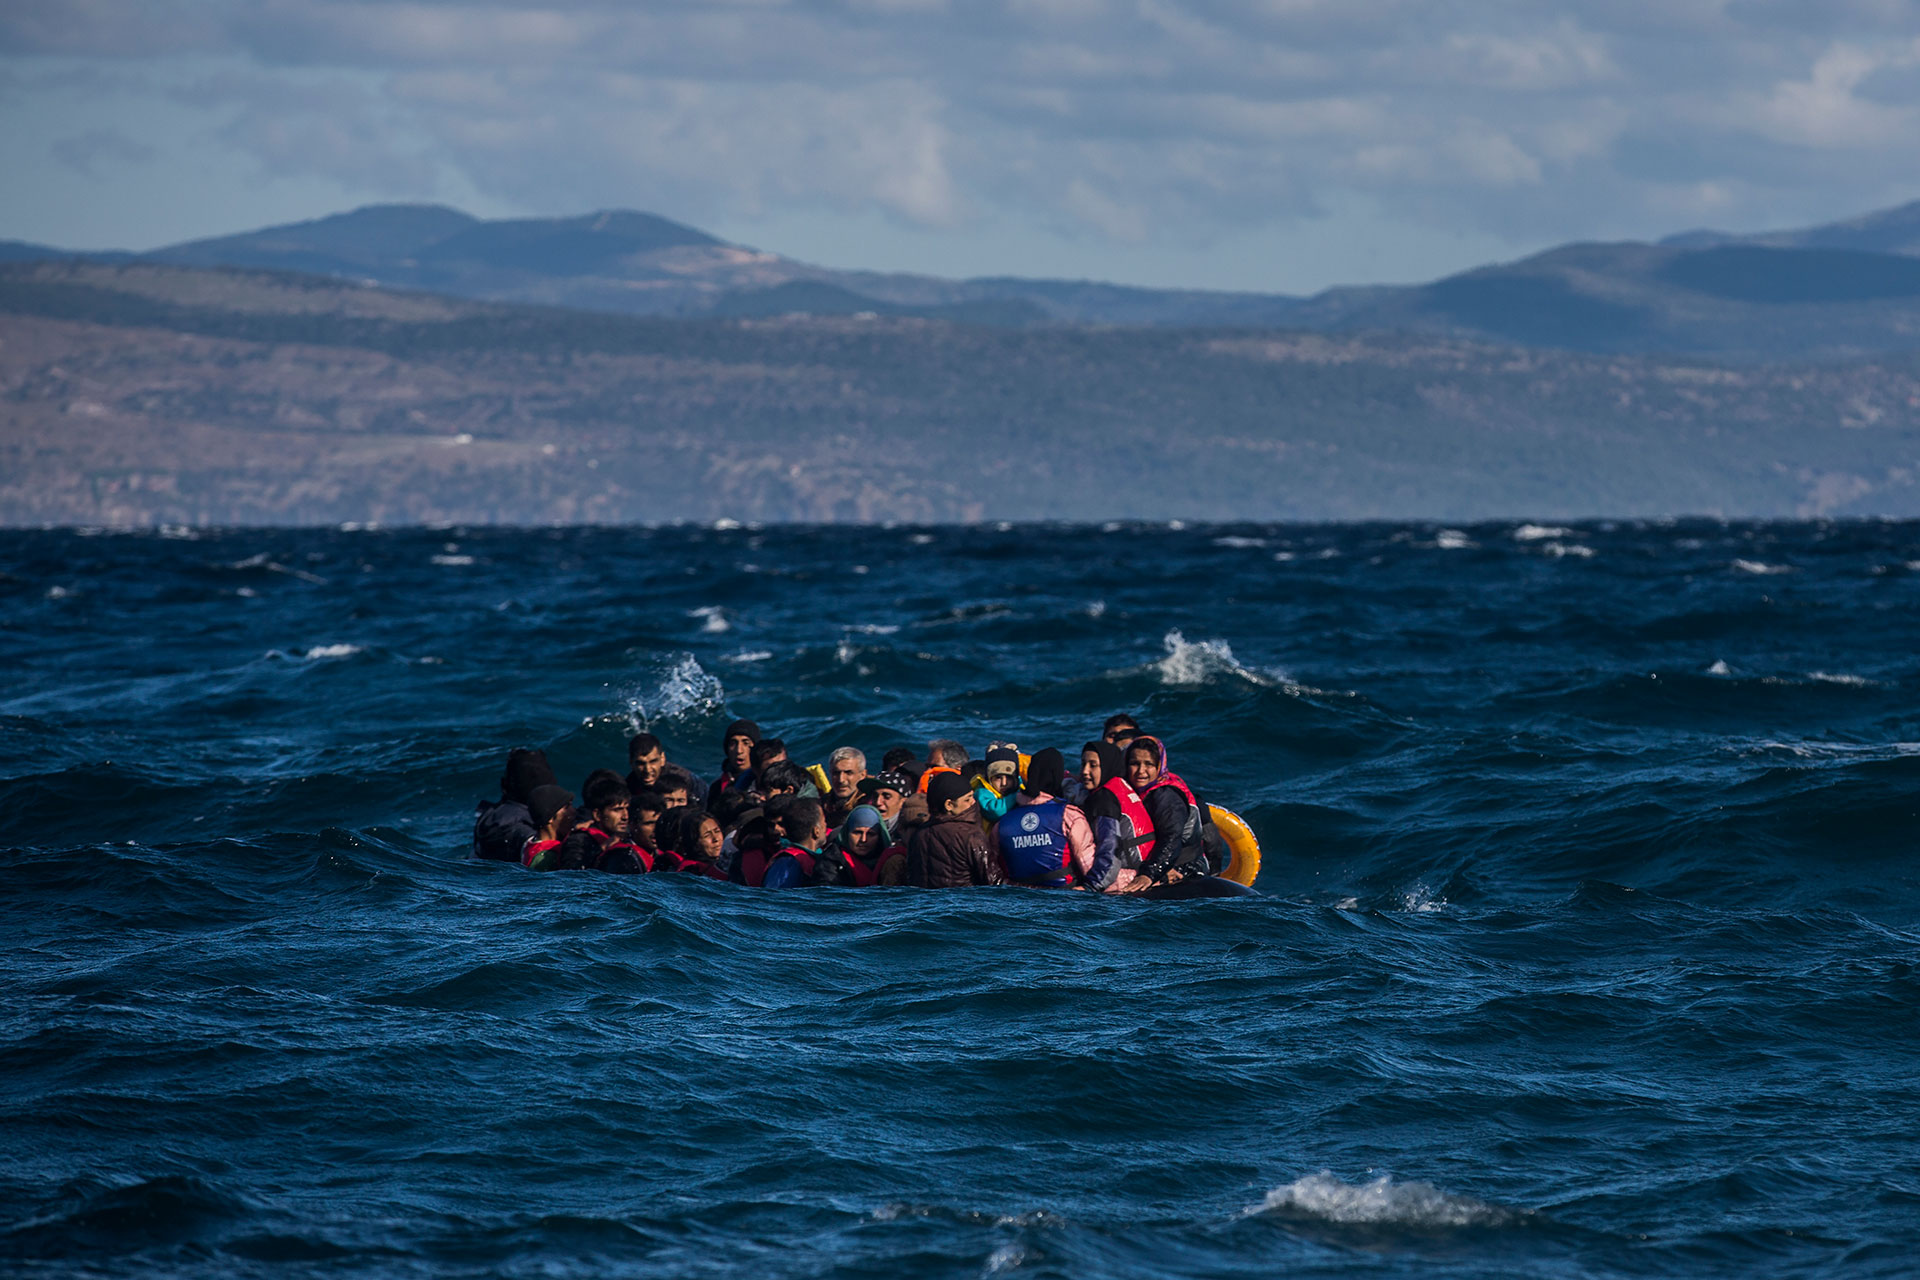 Scores of Afghan refugees approach the coasts of the Greek island of Lesbos on board an unstable plastic boat which is about to sink.